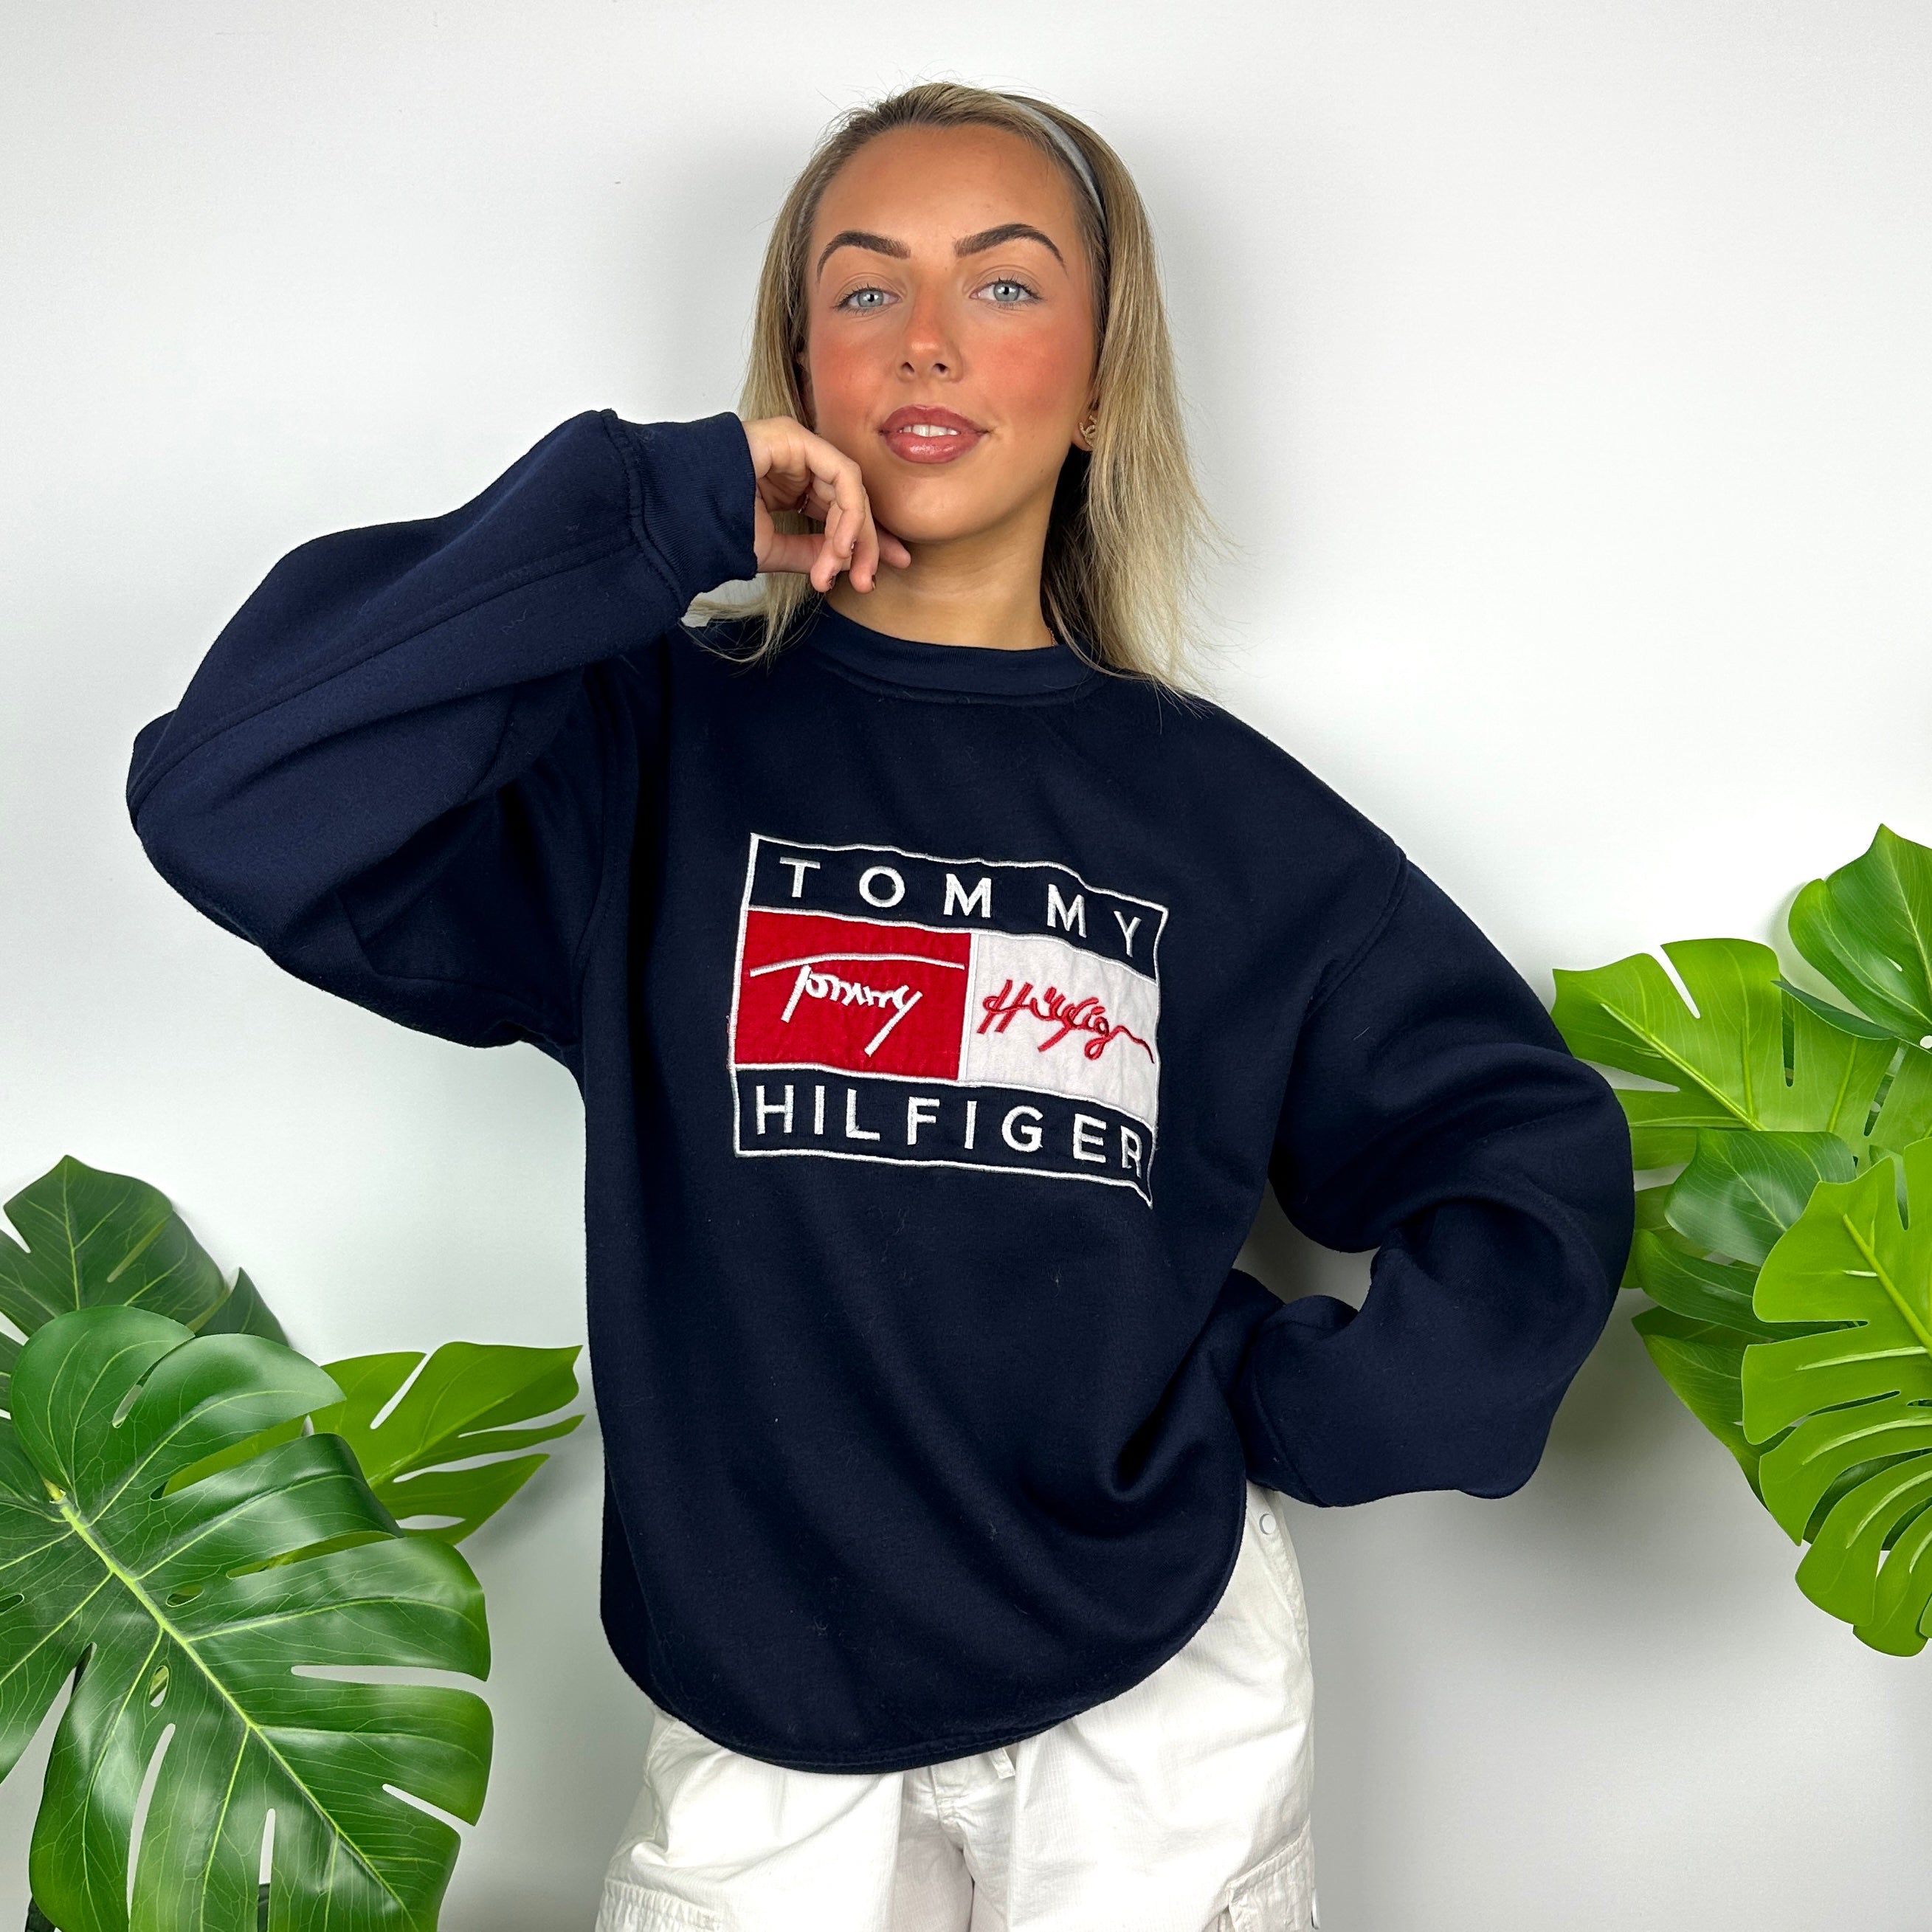 Tommy Hilfiger Navy Embroidered Spell Out Sweatshirt as worn by Annalivia Hynds (M)